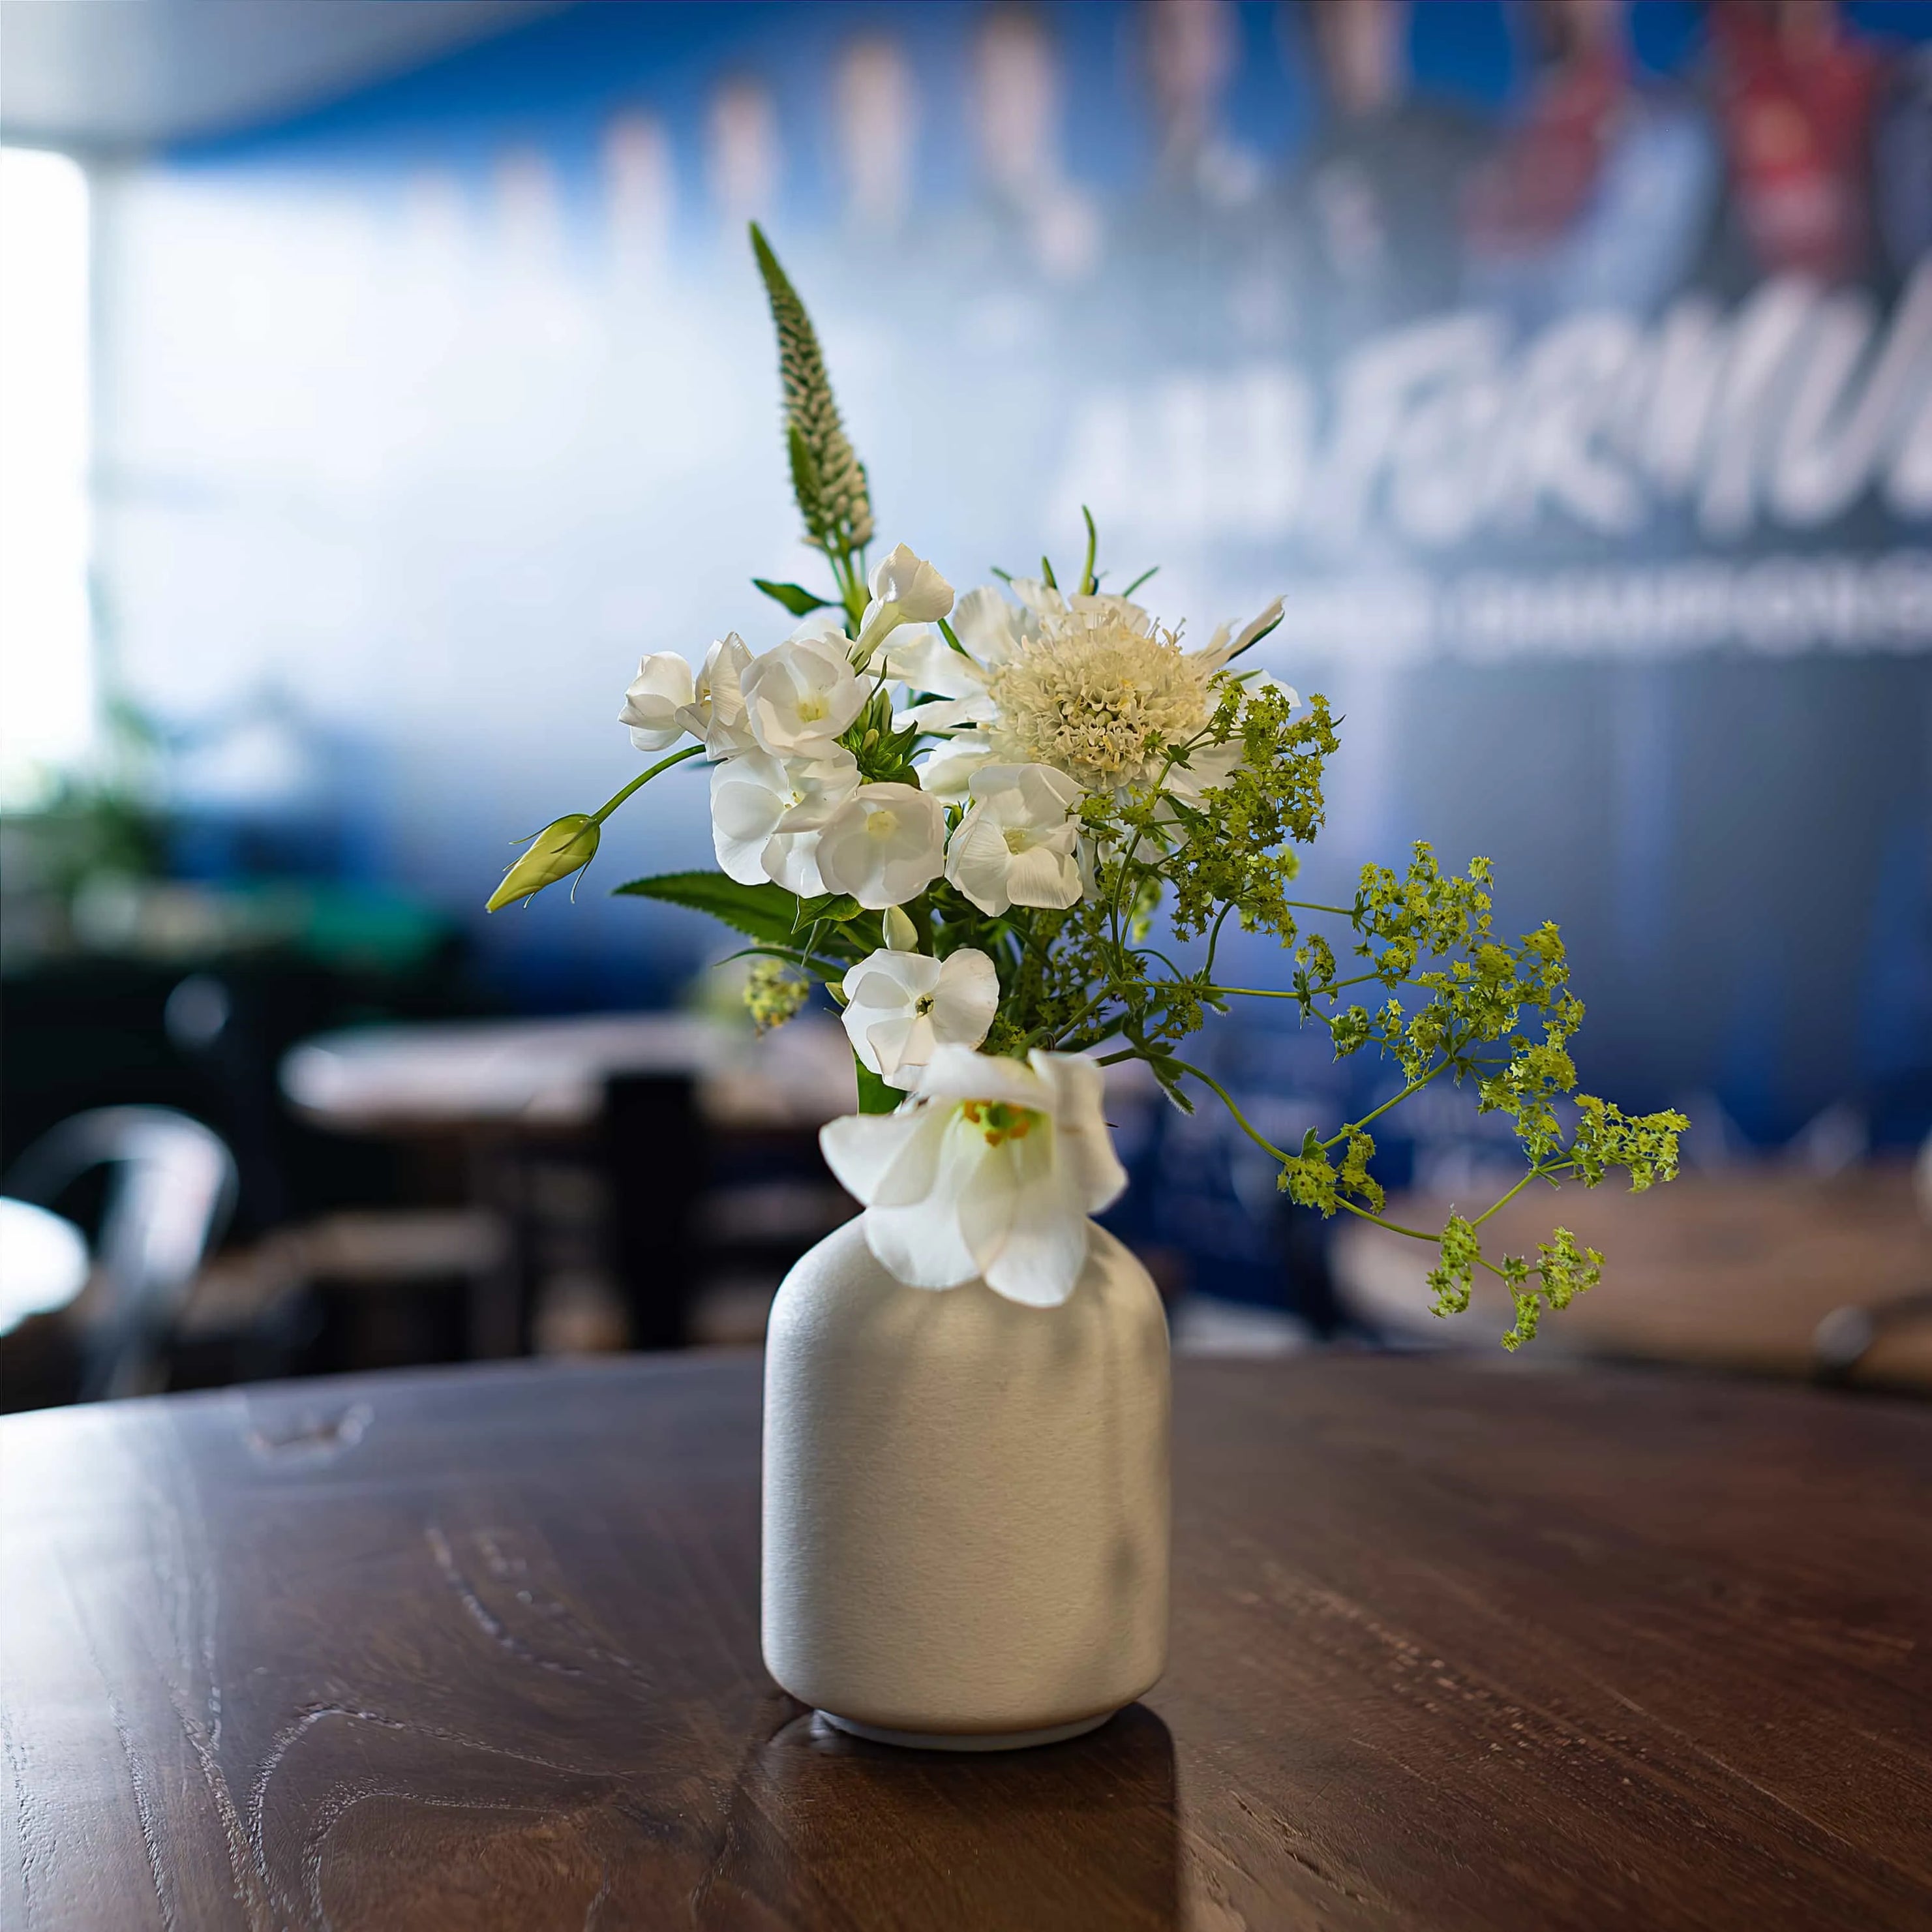 Amaranté London's delicate floral arrangement in a modern white vase featuring white orchids and green foliage, set against the backdrop of the Formula E branding.